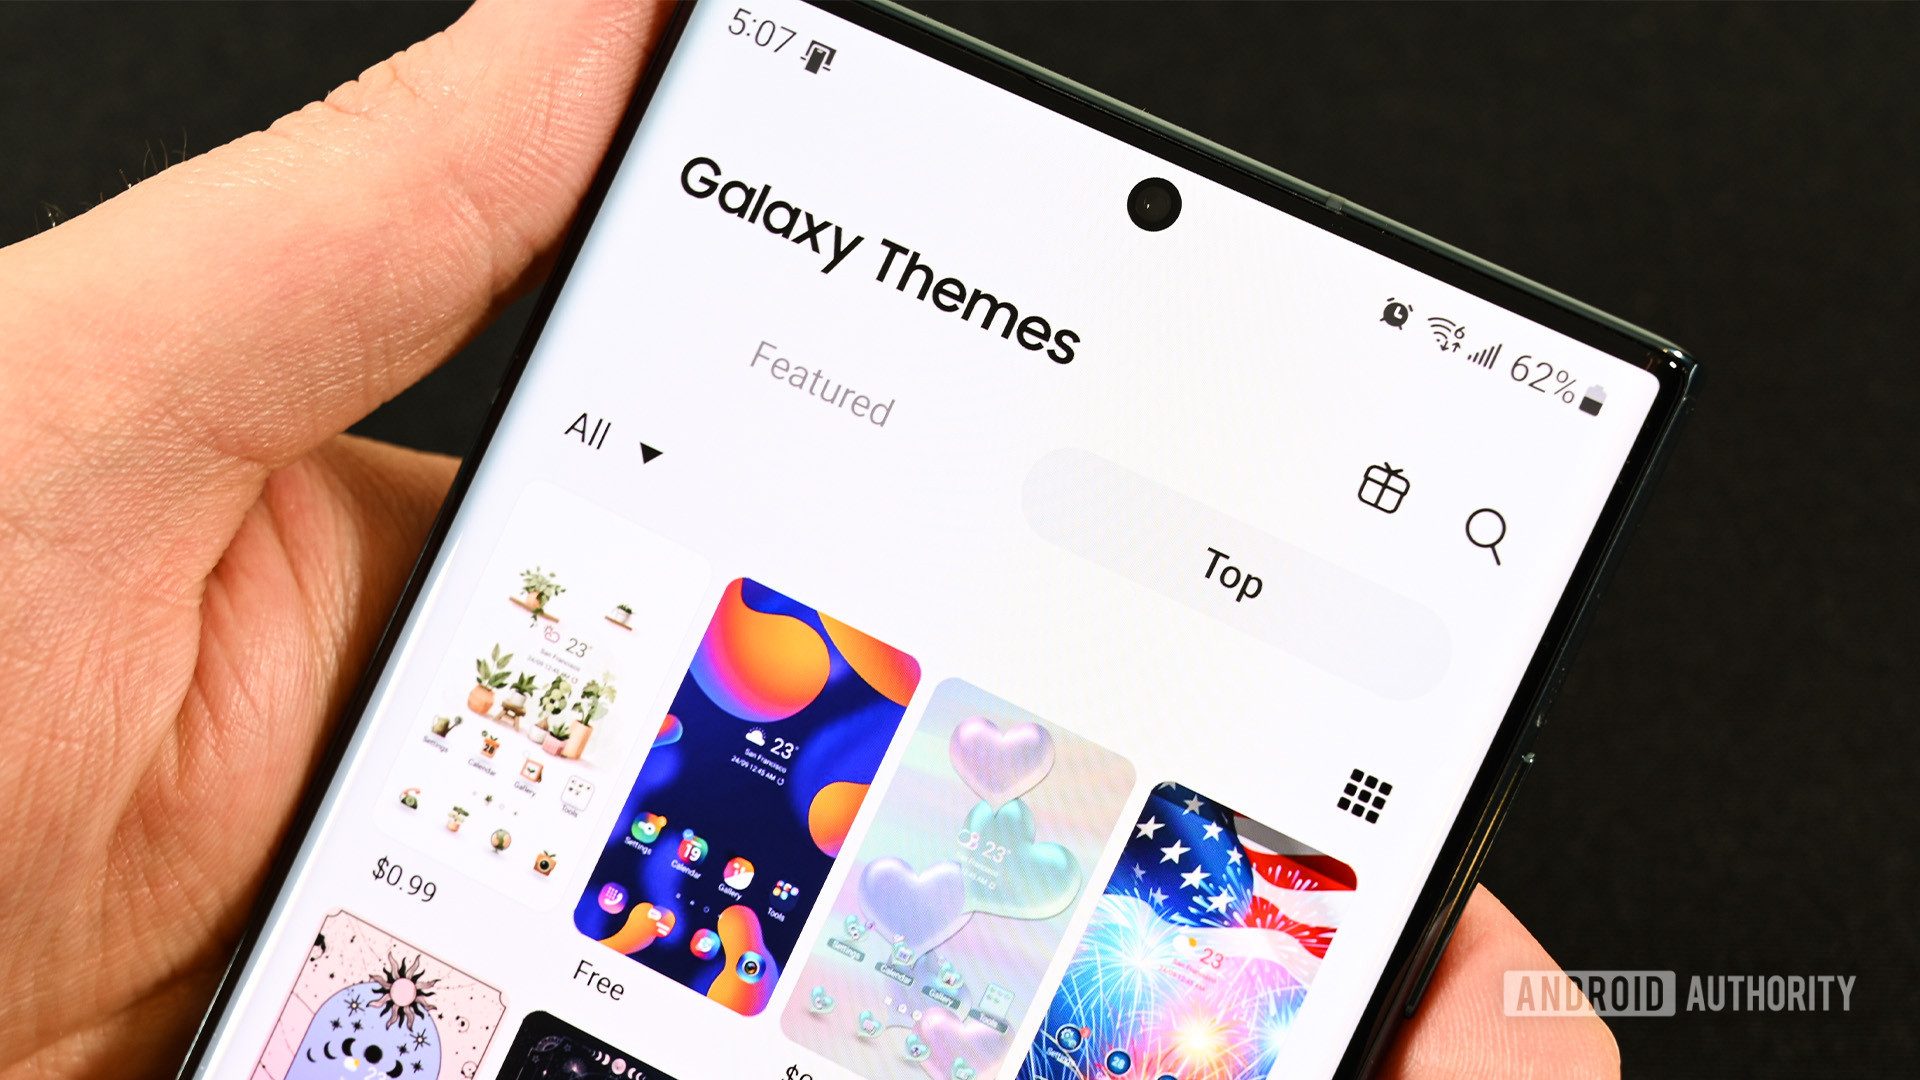 Samsung Galaxy Theme Store: What it is and how to use it